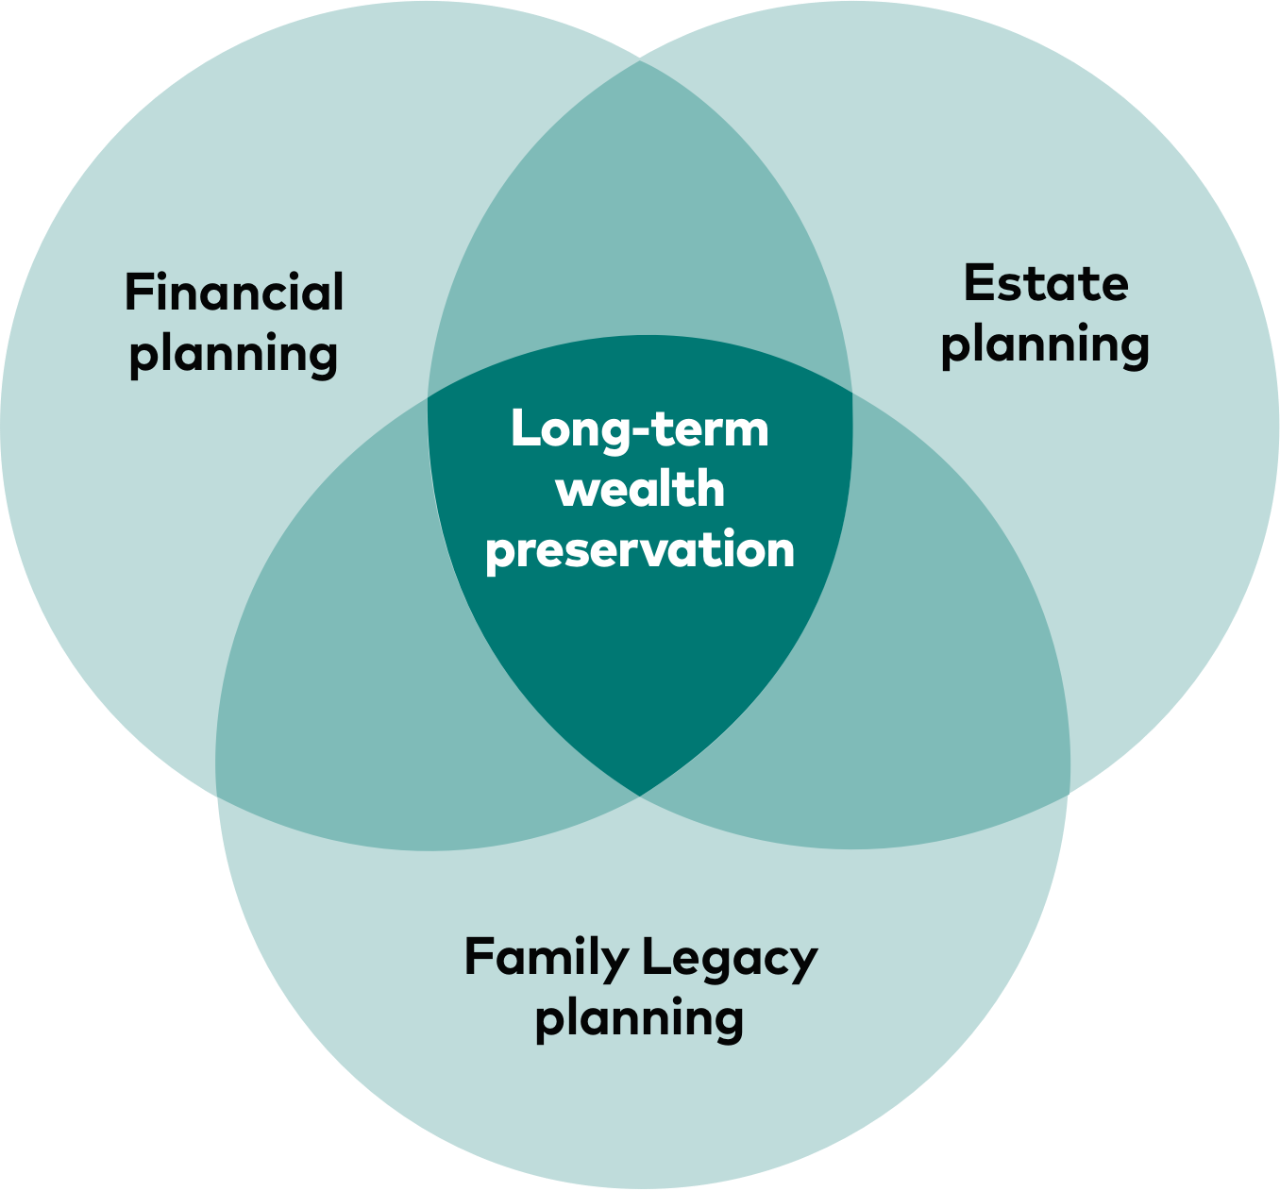 A Venn diagram showing how financial planning, estate planning, and family legacy planning intersect in long-term wealth preservation.